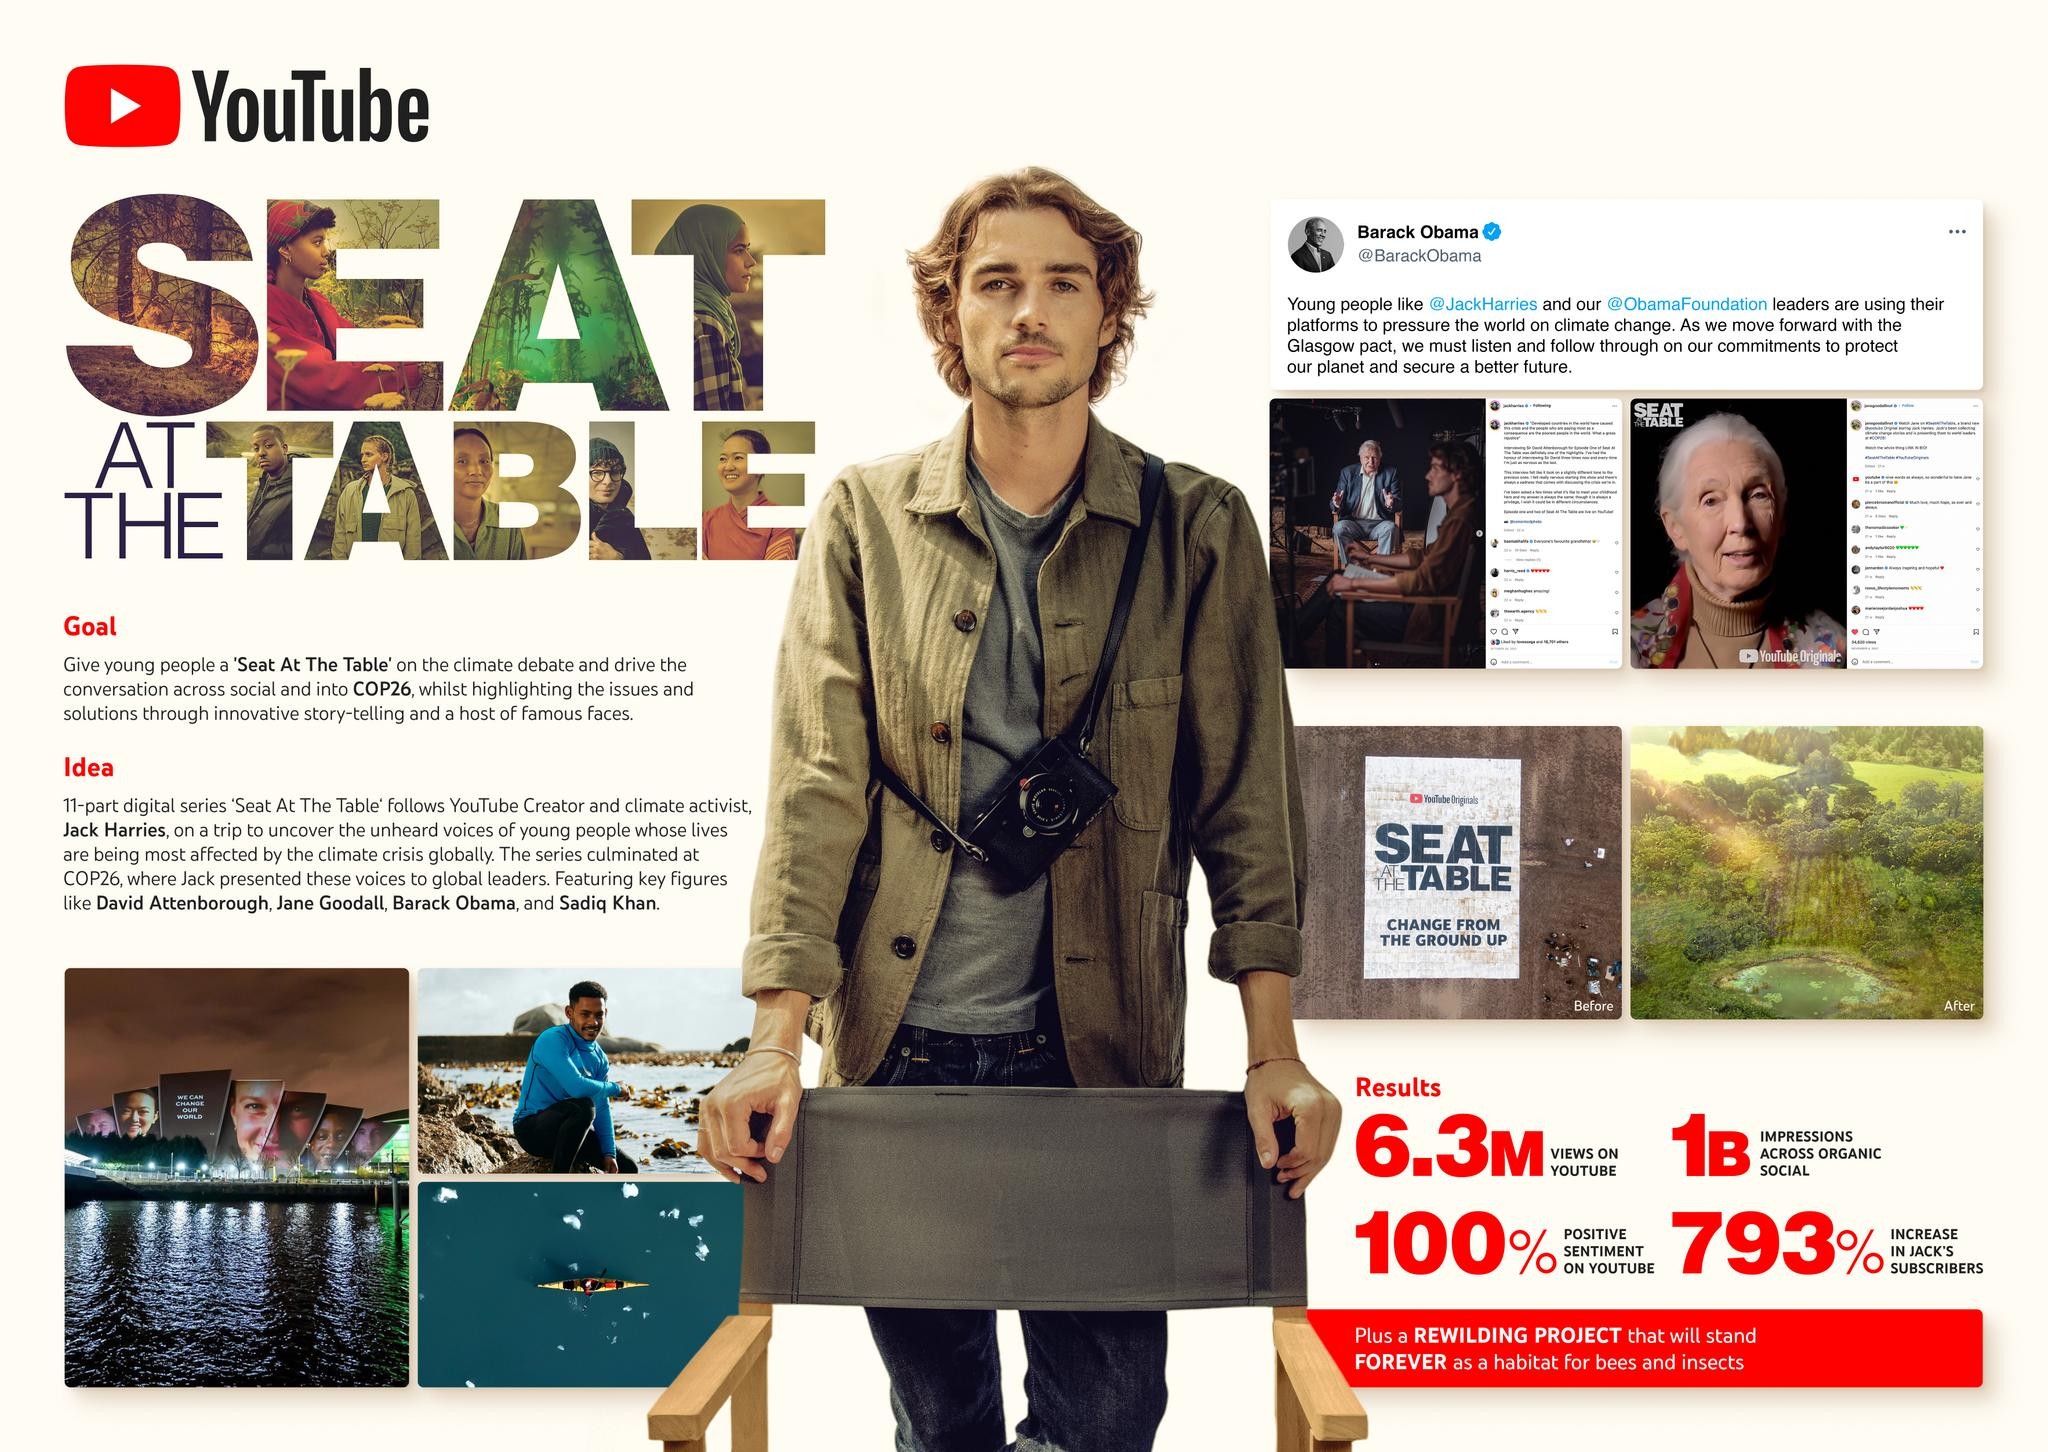 YouTube's Seat At The Table Campaign